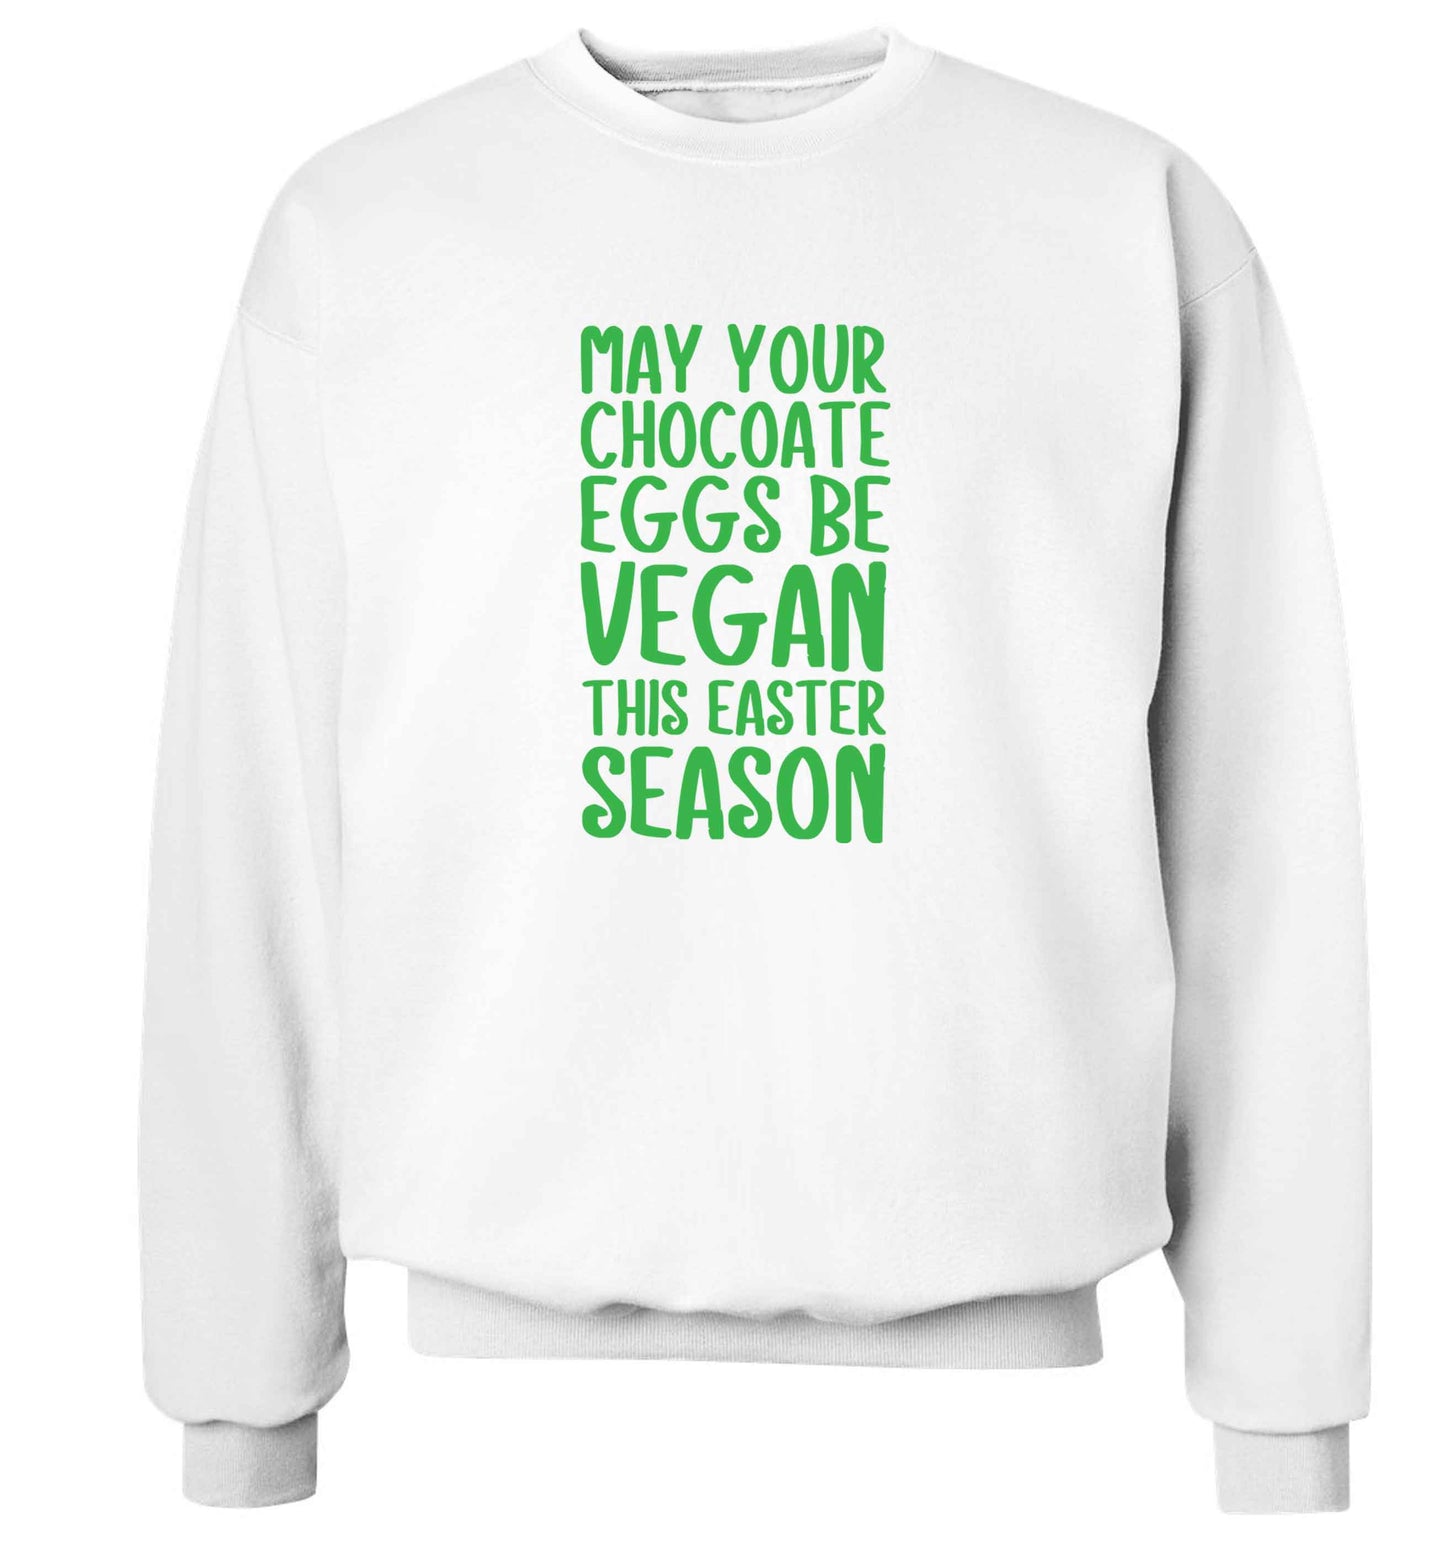 Easter bunny approved! Vegans will love this easter themed adult's unisex white sweater 2XL